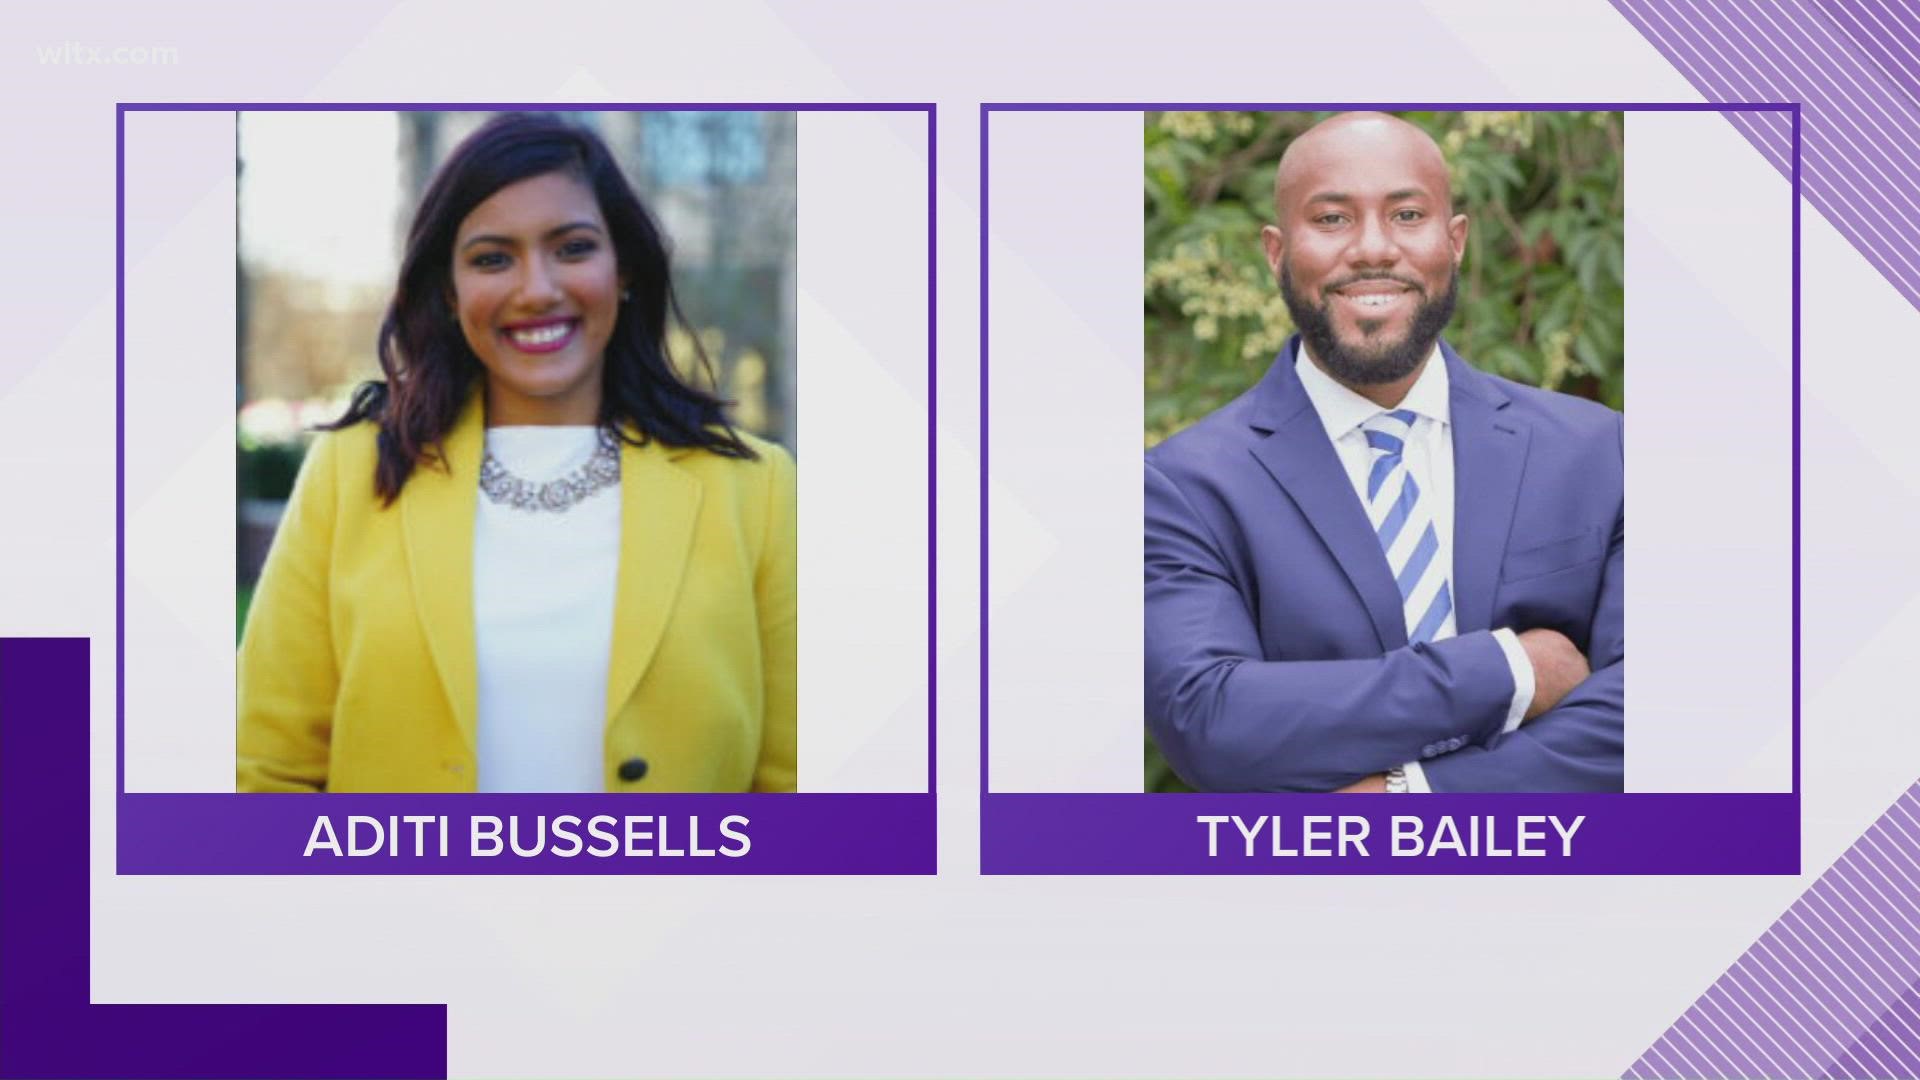 Aditi Bussells and Tyler Bailey will compete in a runoff election on November 16th for Columbia's at-large council seat. Here's where they stand on the issues.